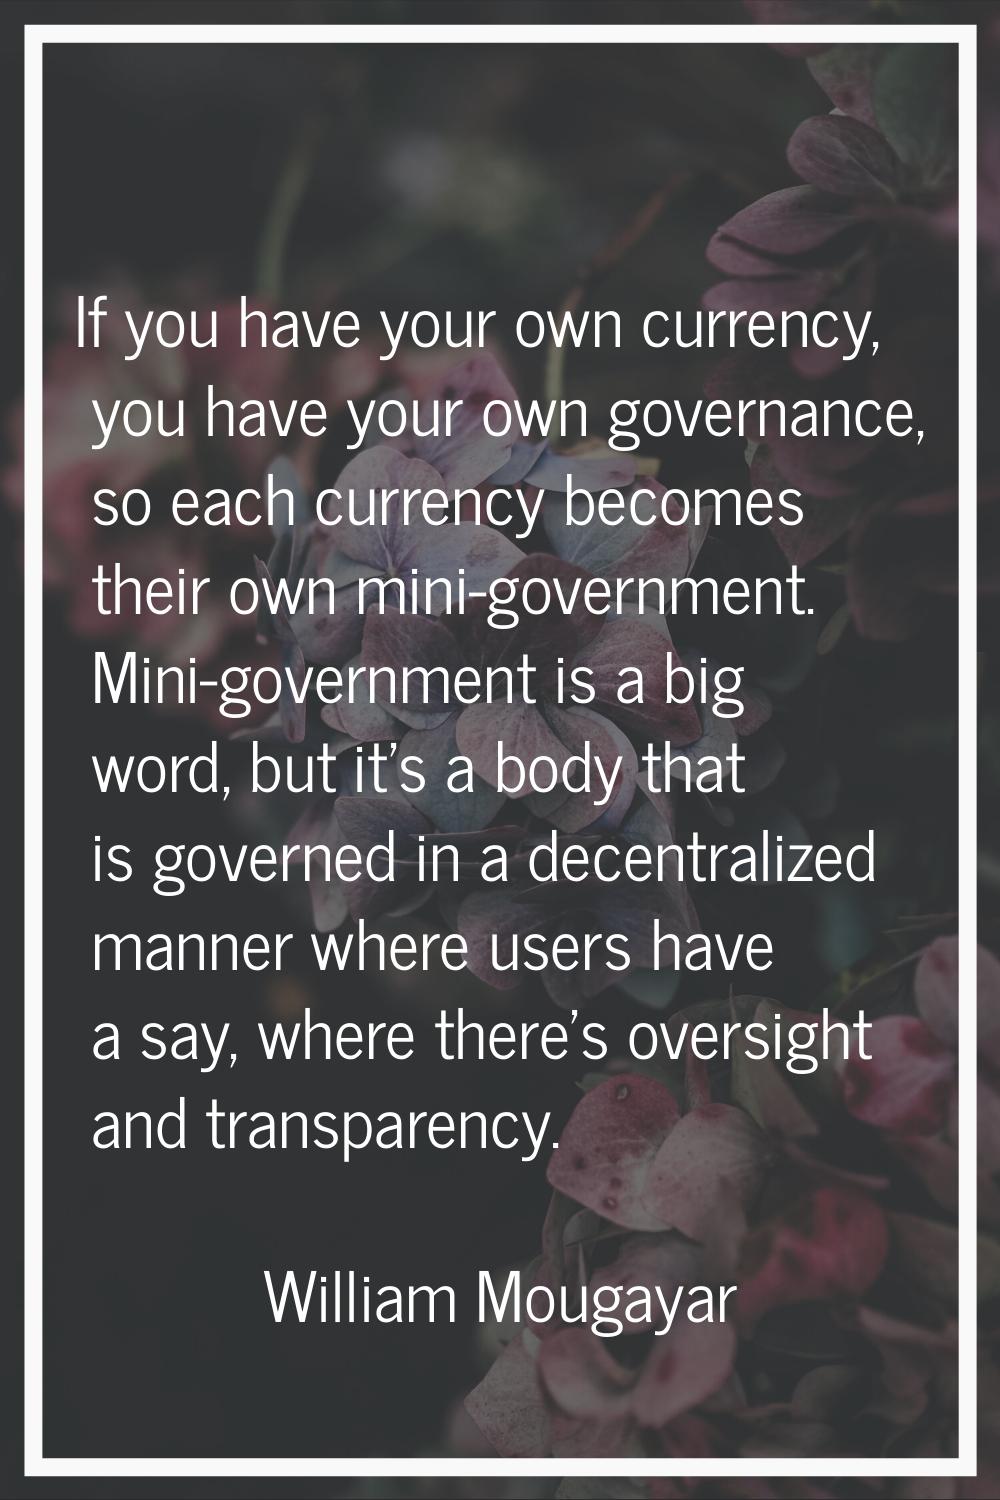 If you have your own currency, you have your own governance, so each currency becomes their own min